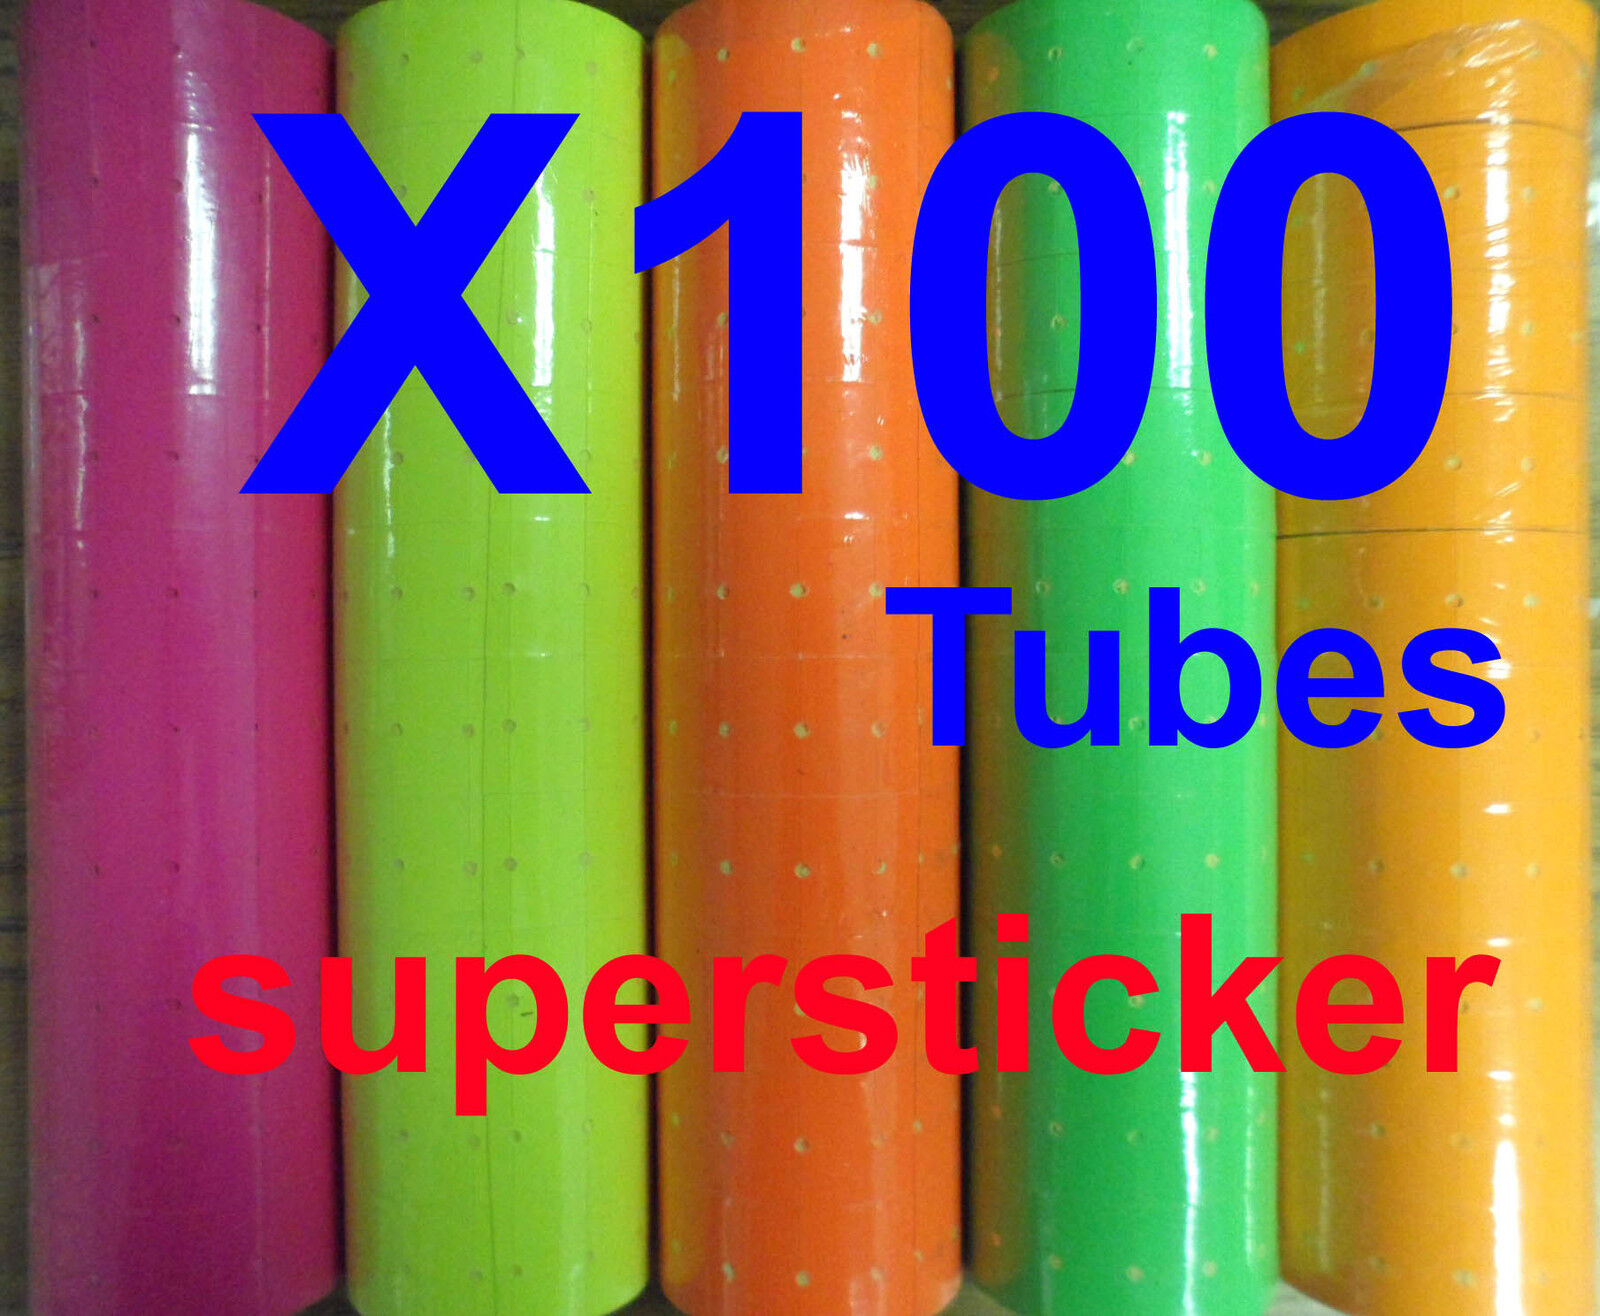 100 Tubes Oakland Mall Colors X 500 Tags shopping labels 989 L-5500 Refill MX M for